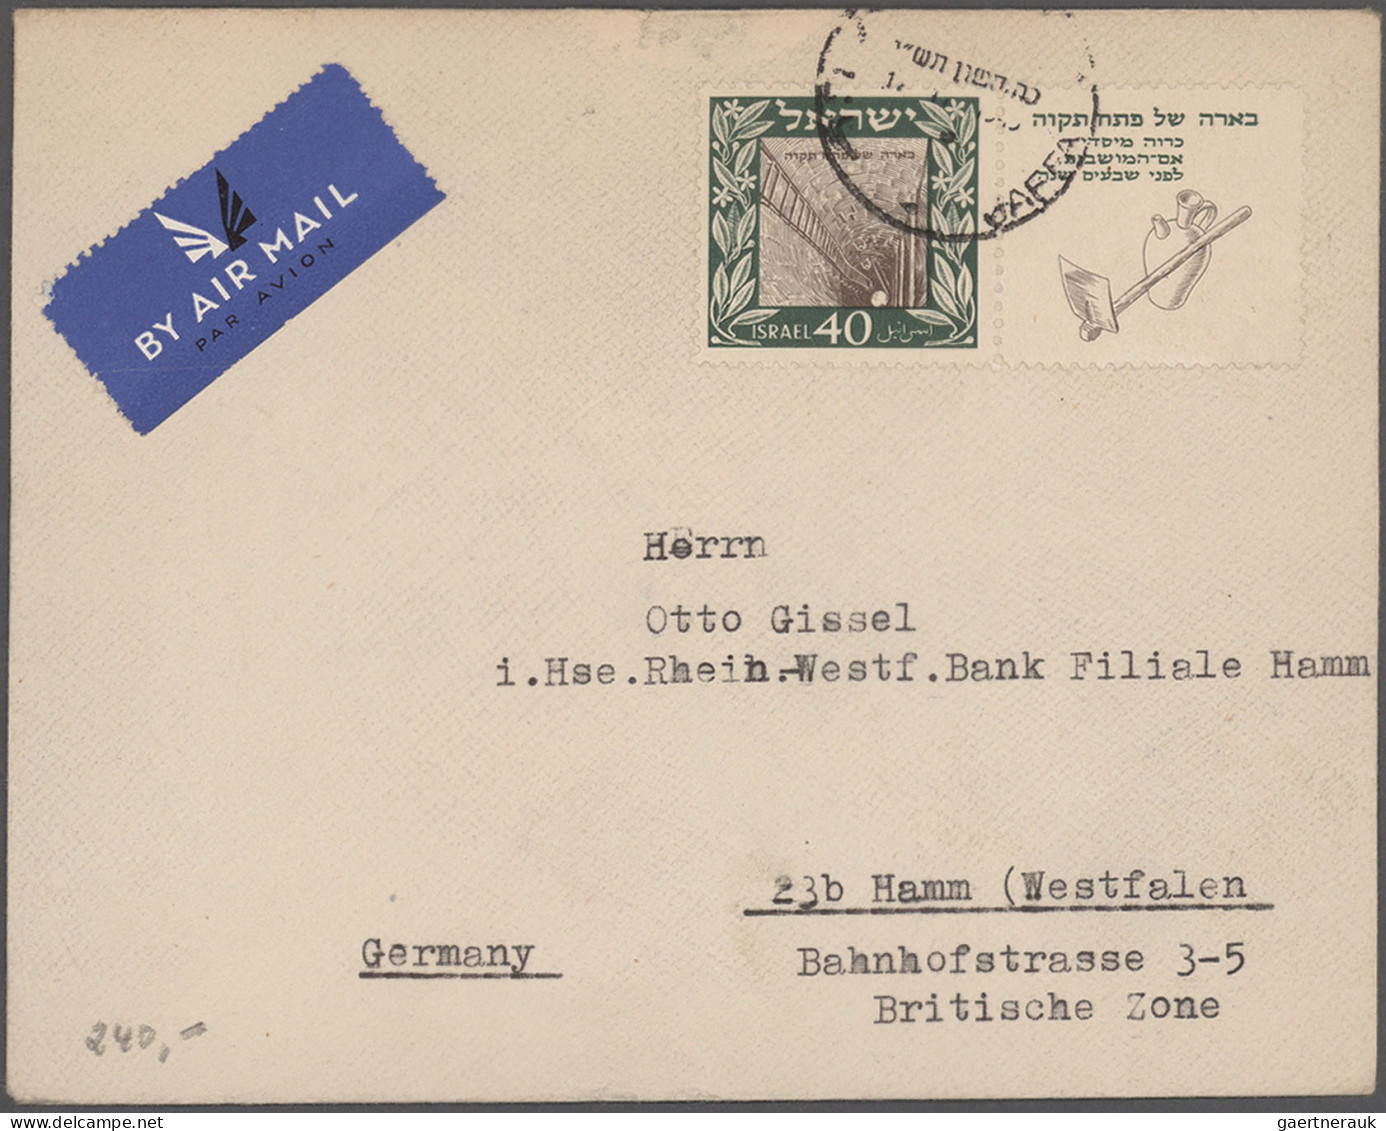 Israel: 1943/1953, Palestine+early Israel, lot of ten covers/cards incl. Palesti